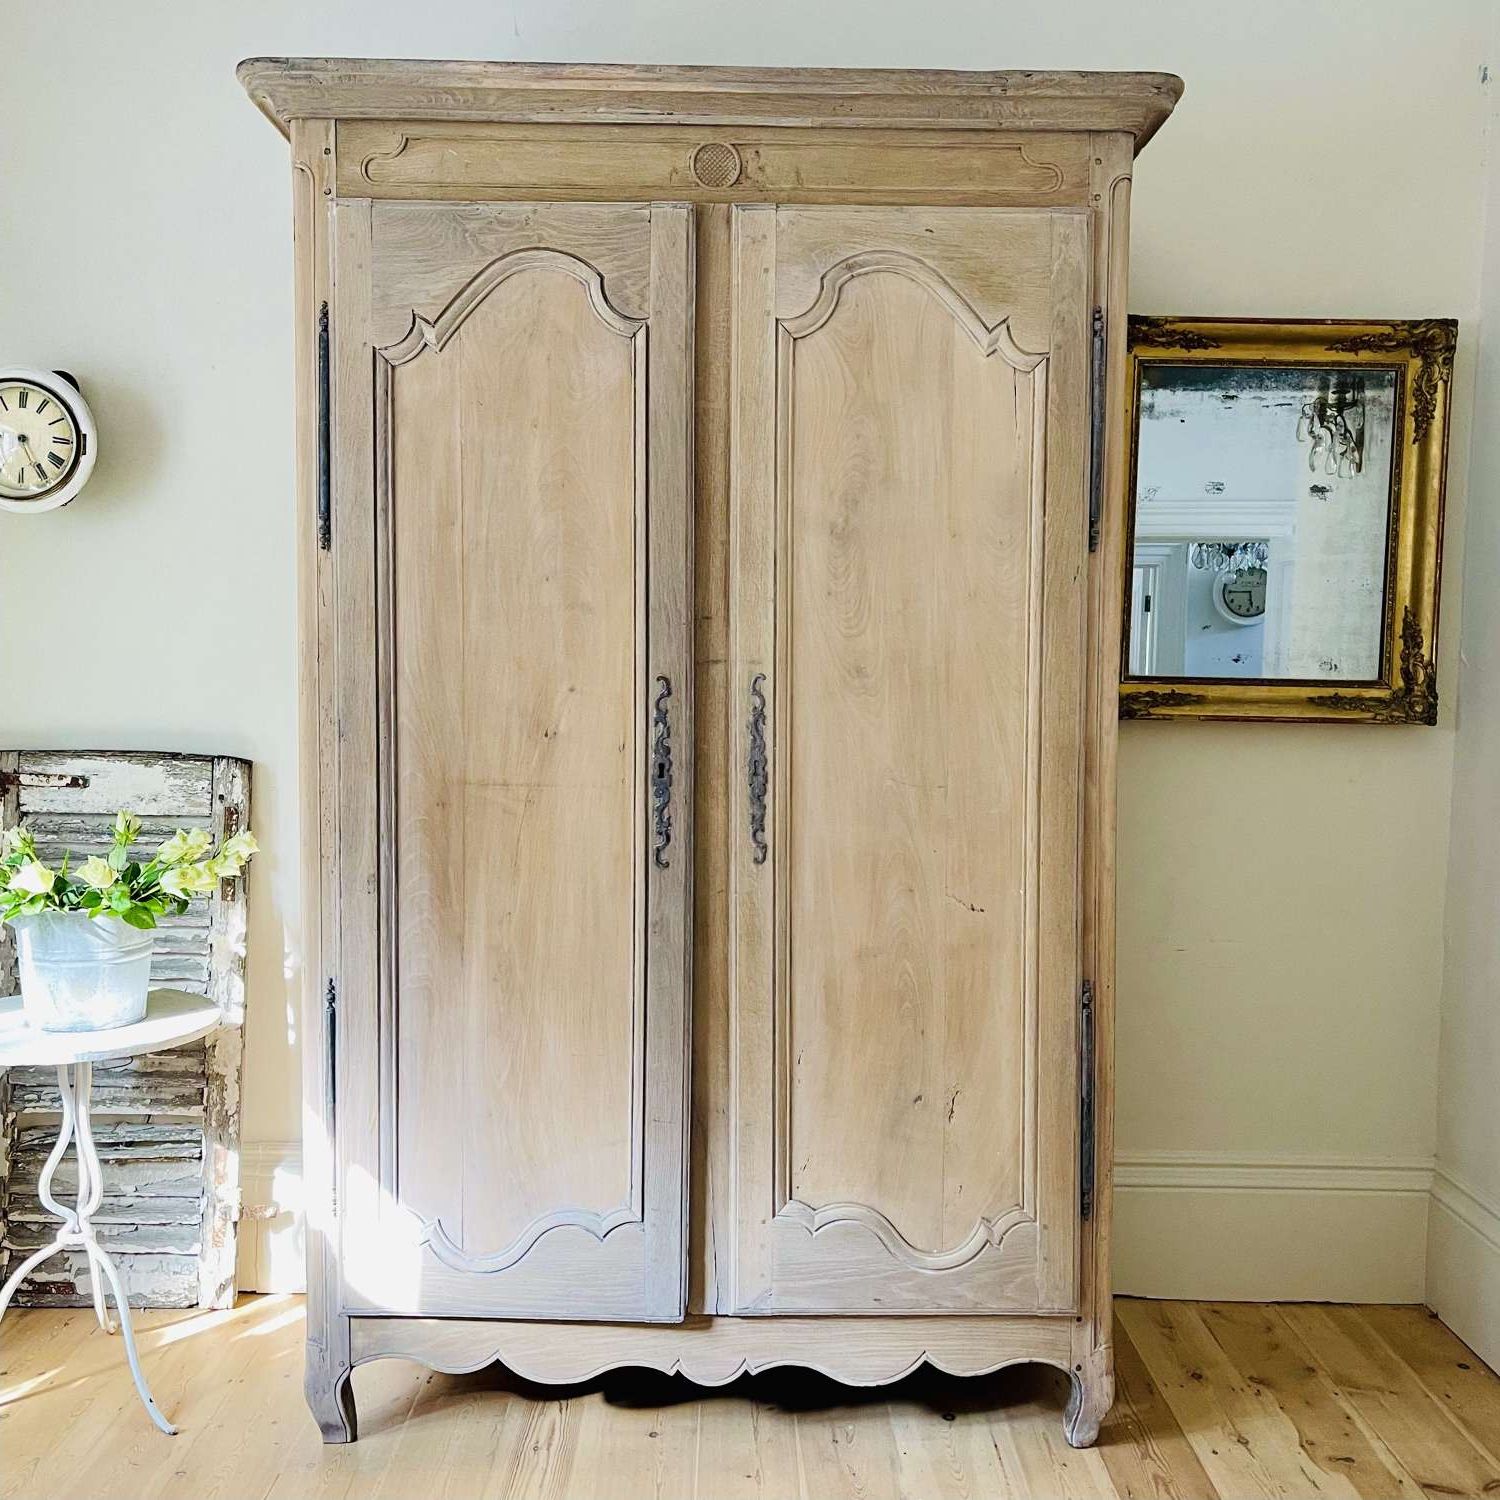 19th Century French Oak Armoire Wardrobe With Hanging Rail Throughout French Style Armoires Wardrobes (Gallery 11 of 20)